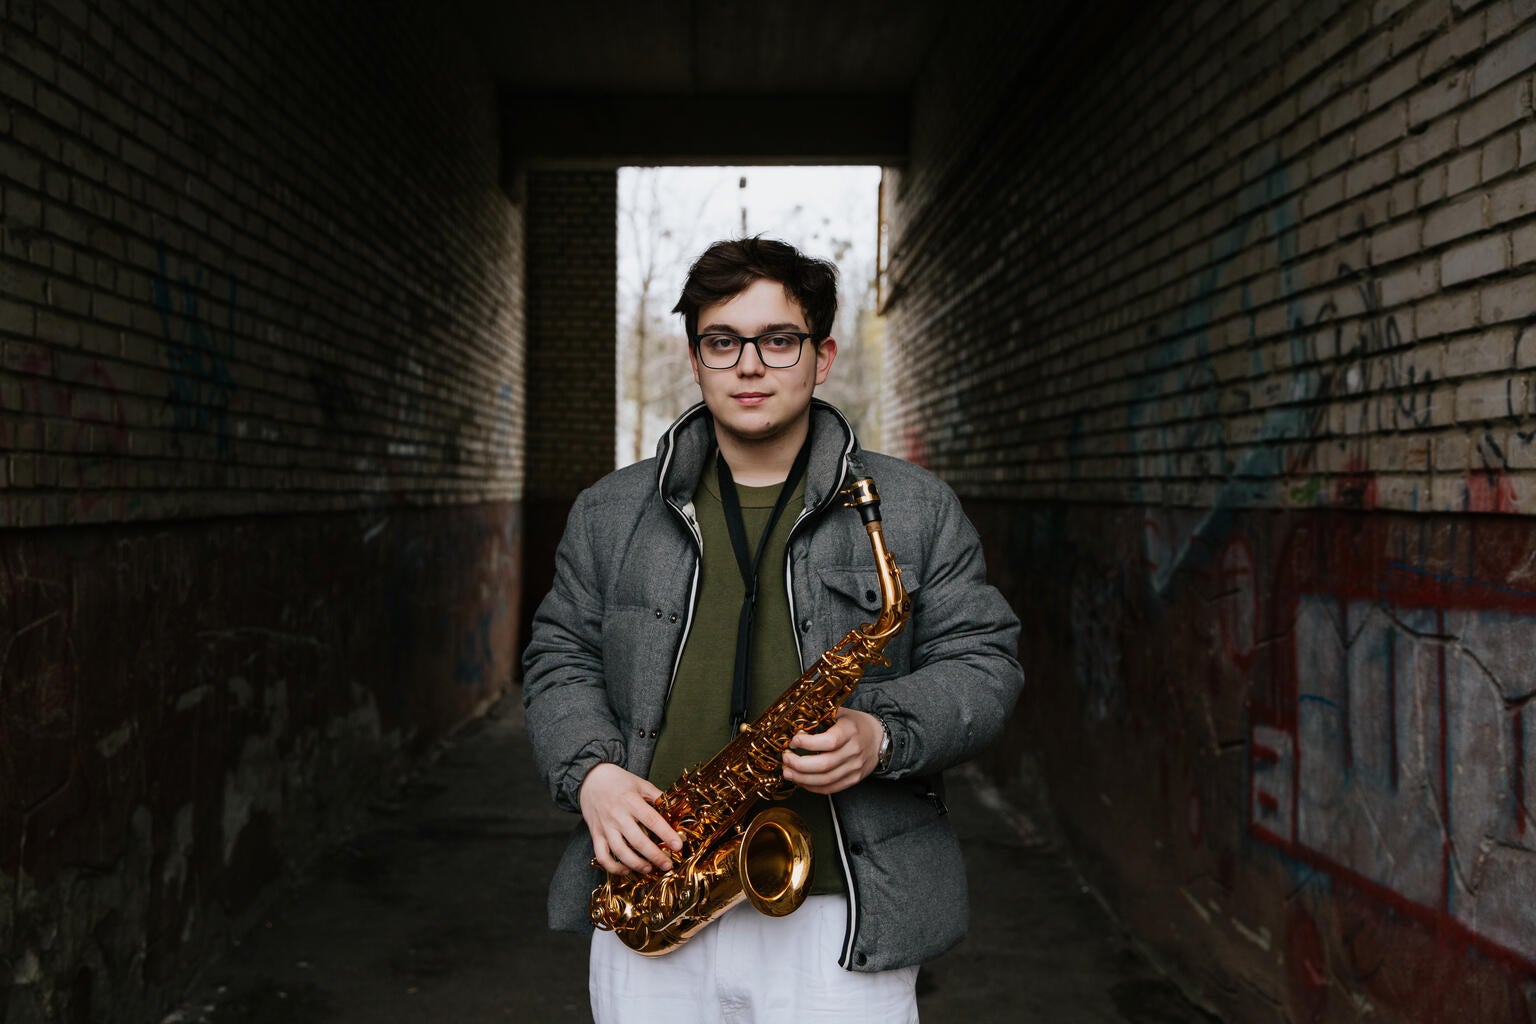 Serhii stands in the streets of Ukraine holding his saxophone